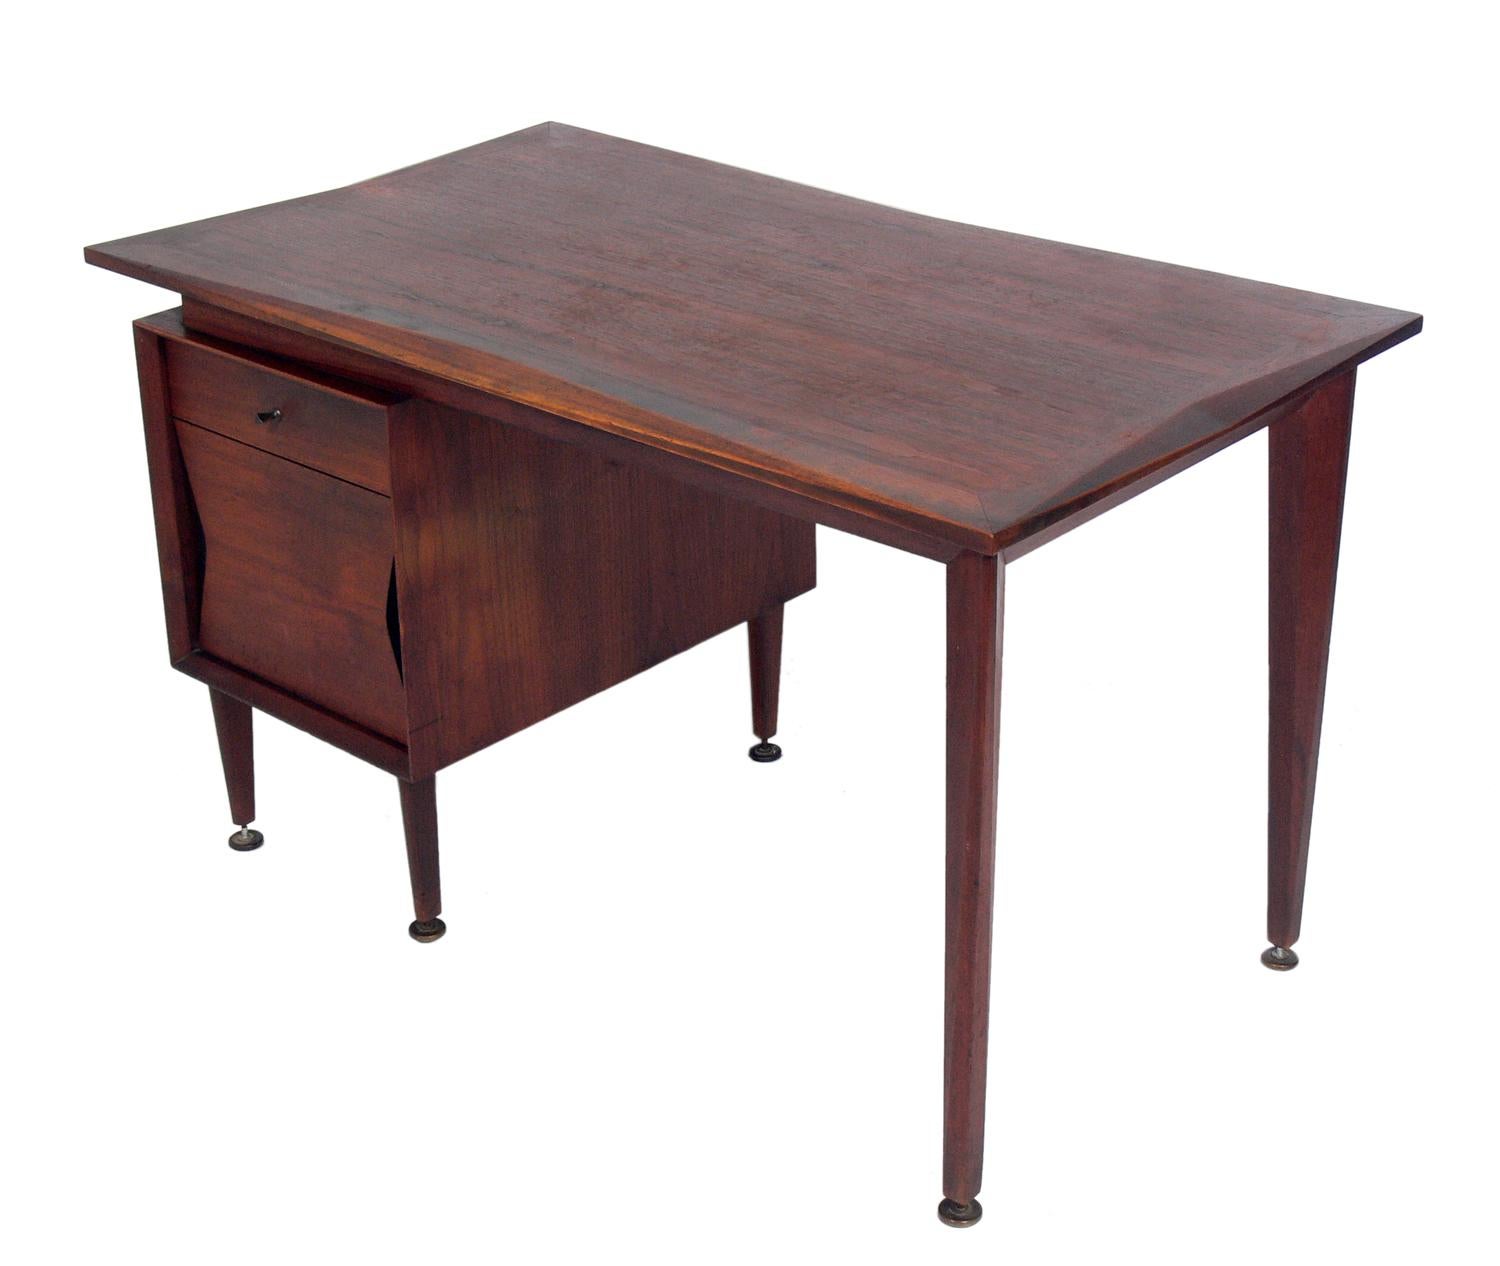 Midcentury walnut desk and chair, designed by Marc Berge for Grosfeld House, American, circa 1960s. This desk and chair are currently being refinished and can be completed in your choice of color. The chair is being reupholstered and can be